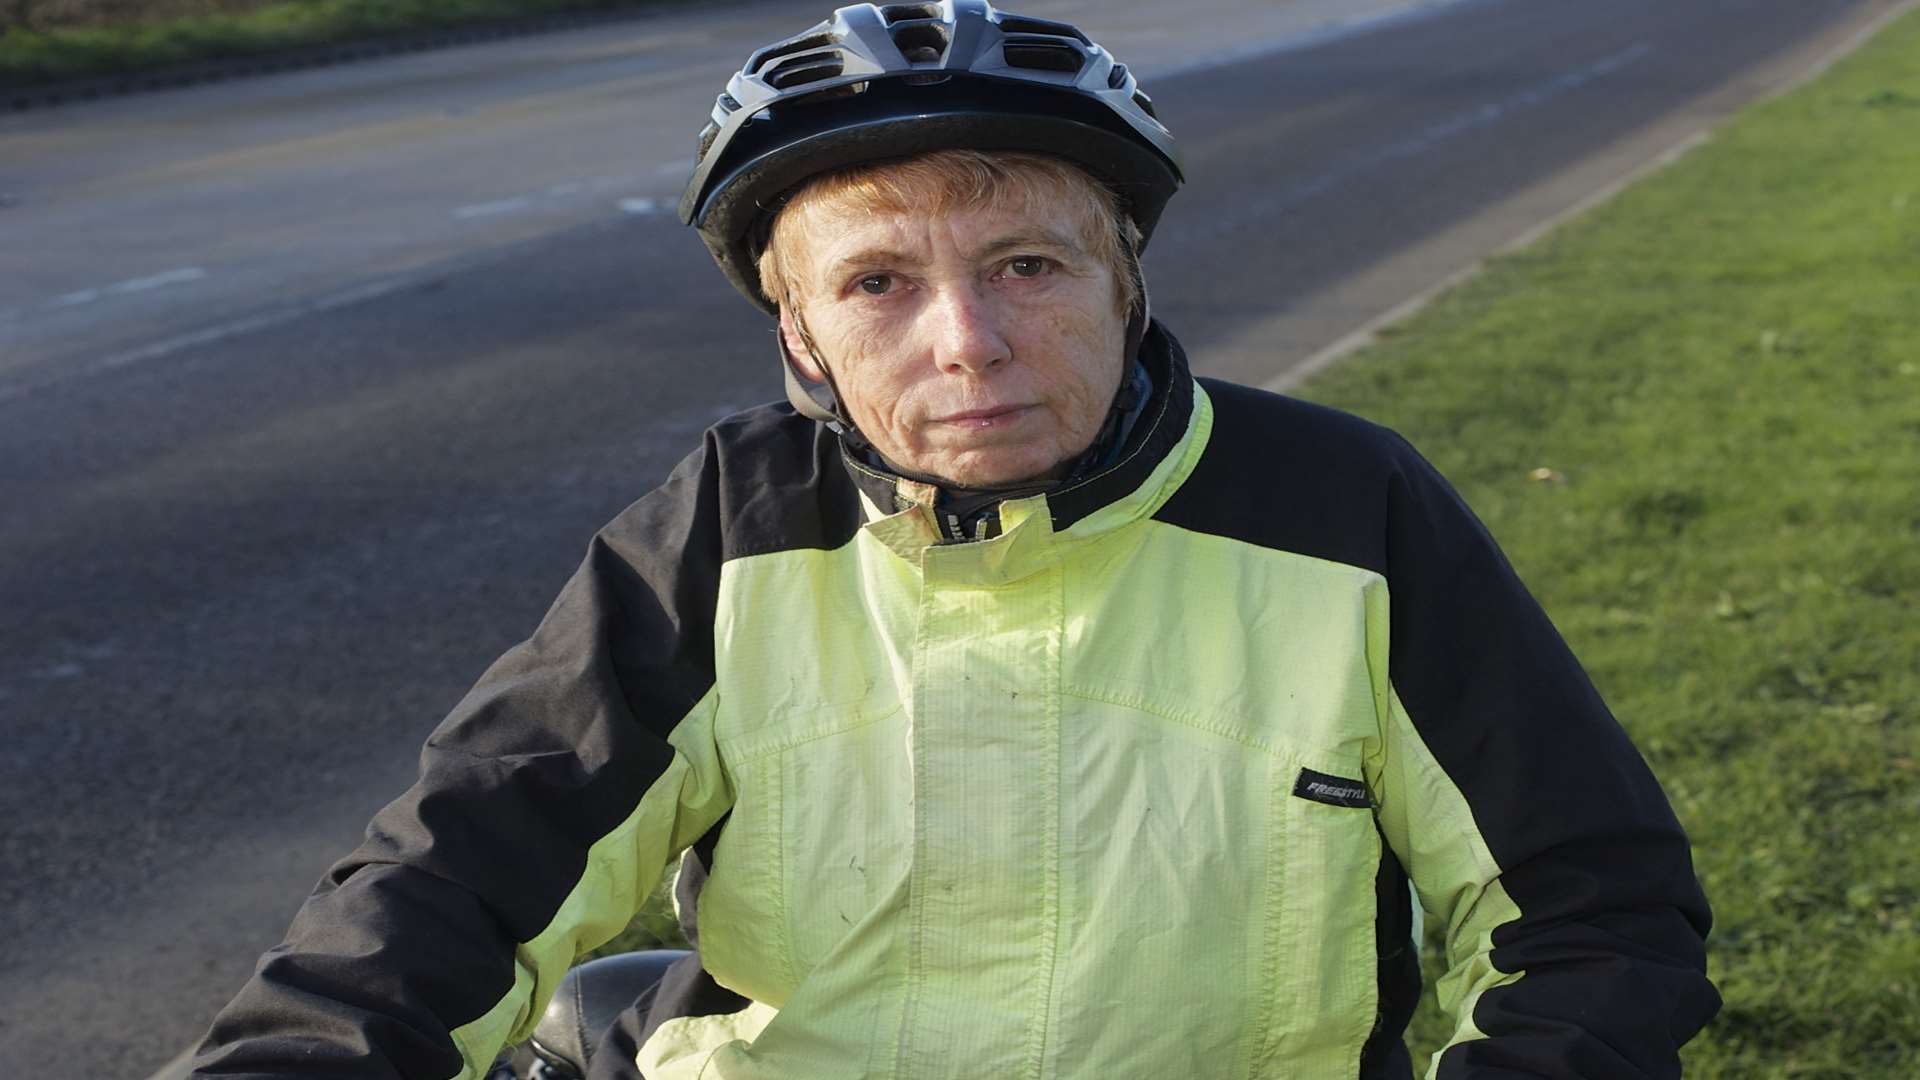 Helen Knell is campaigning for better cycling provision to be made on Lower Road, Minster